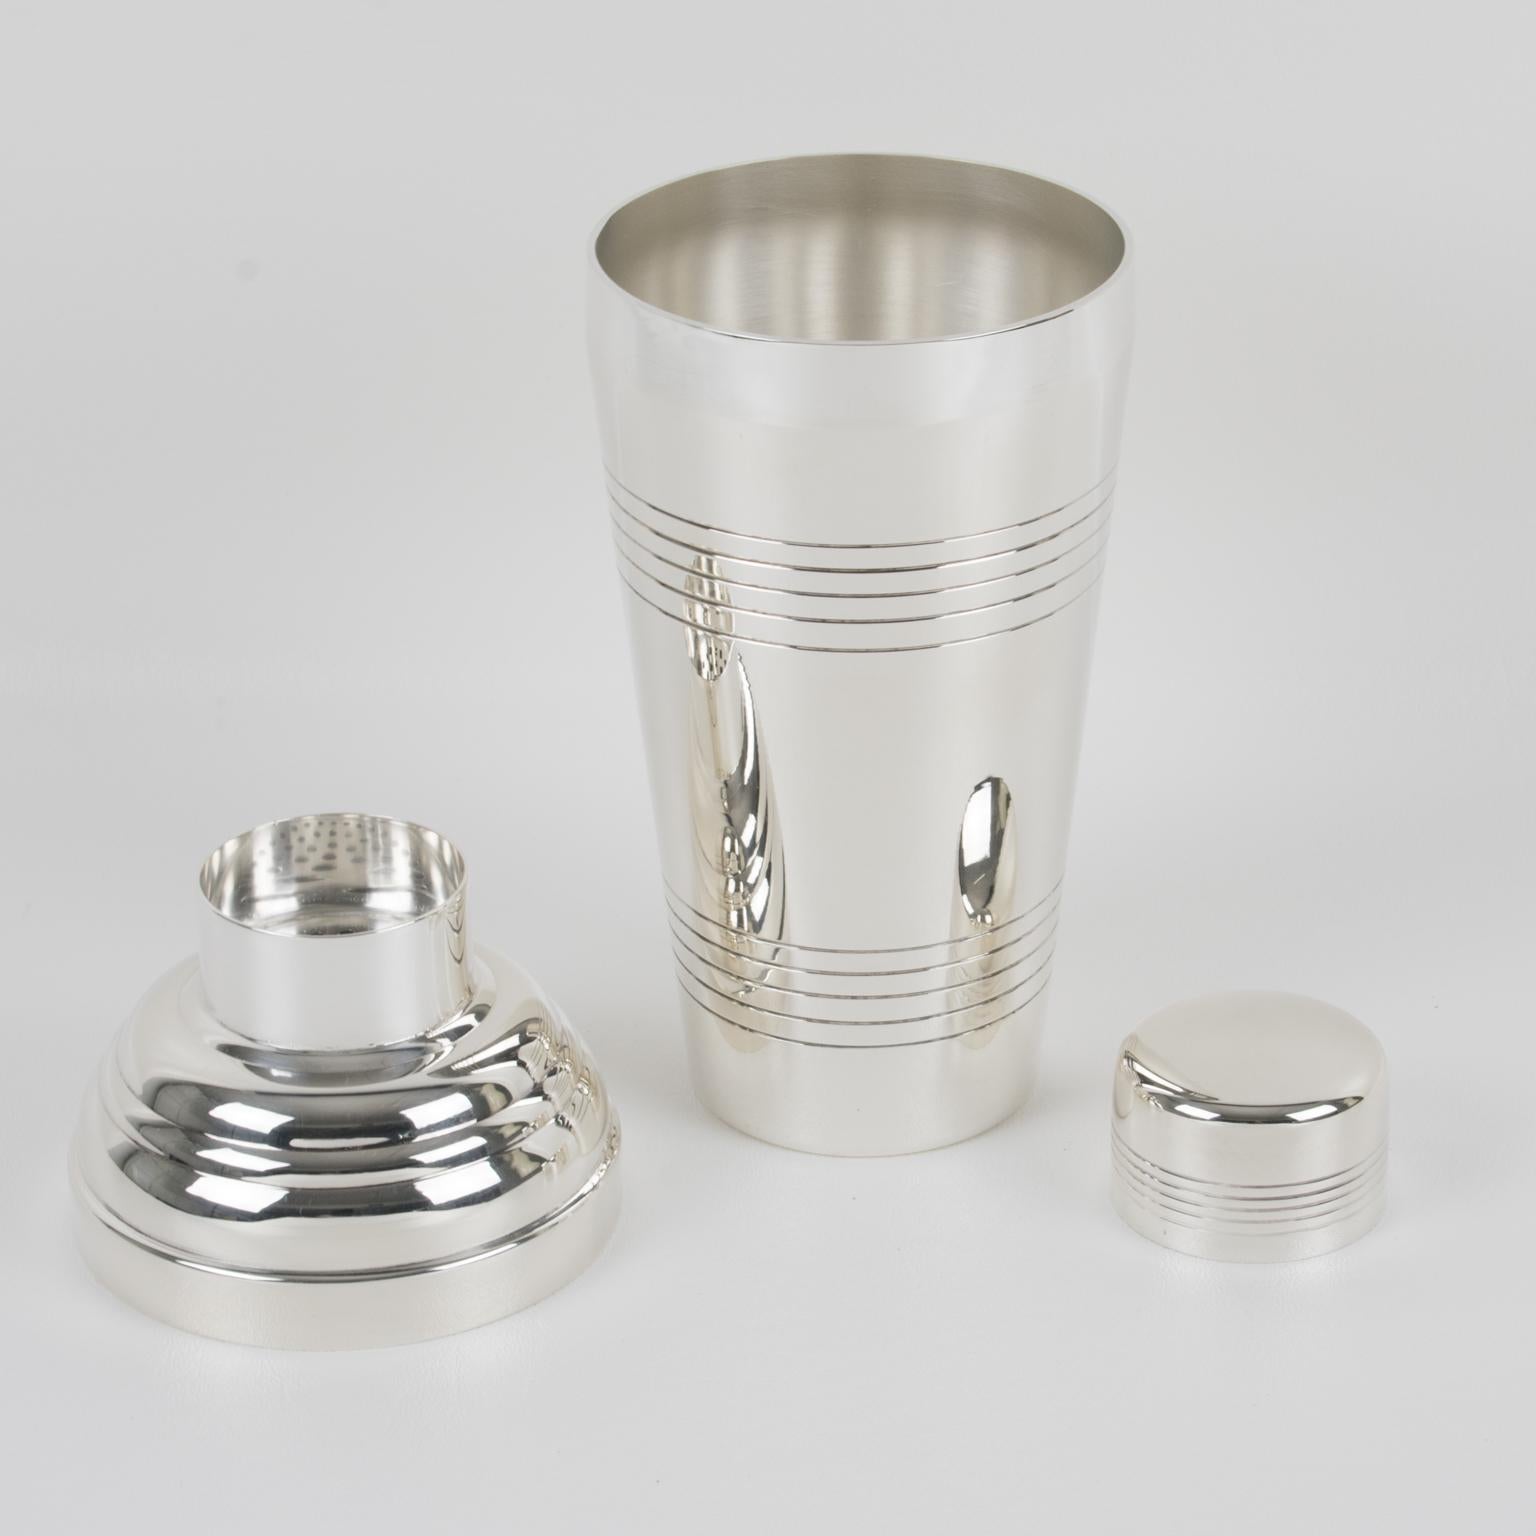 Elegant French Art Deco silver plate cylindrical cocktail or Martini shaker by silversmith Gelb, Paris. Three-sectioned designed cocktail shaker with removable cap and strainer. Lovely geometric shape with typical Deco design. Marked underside with